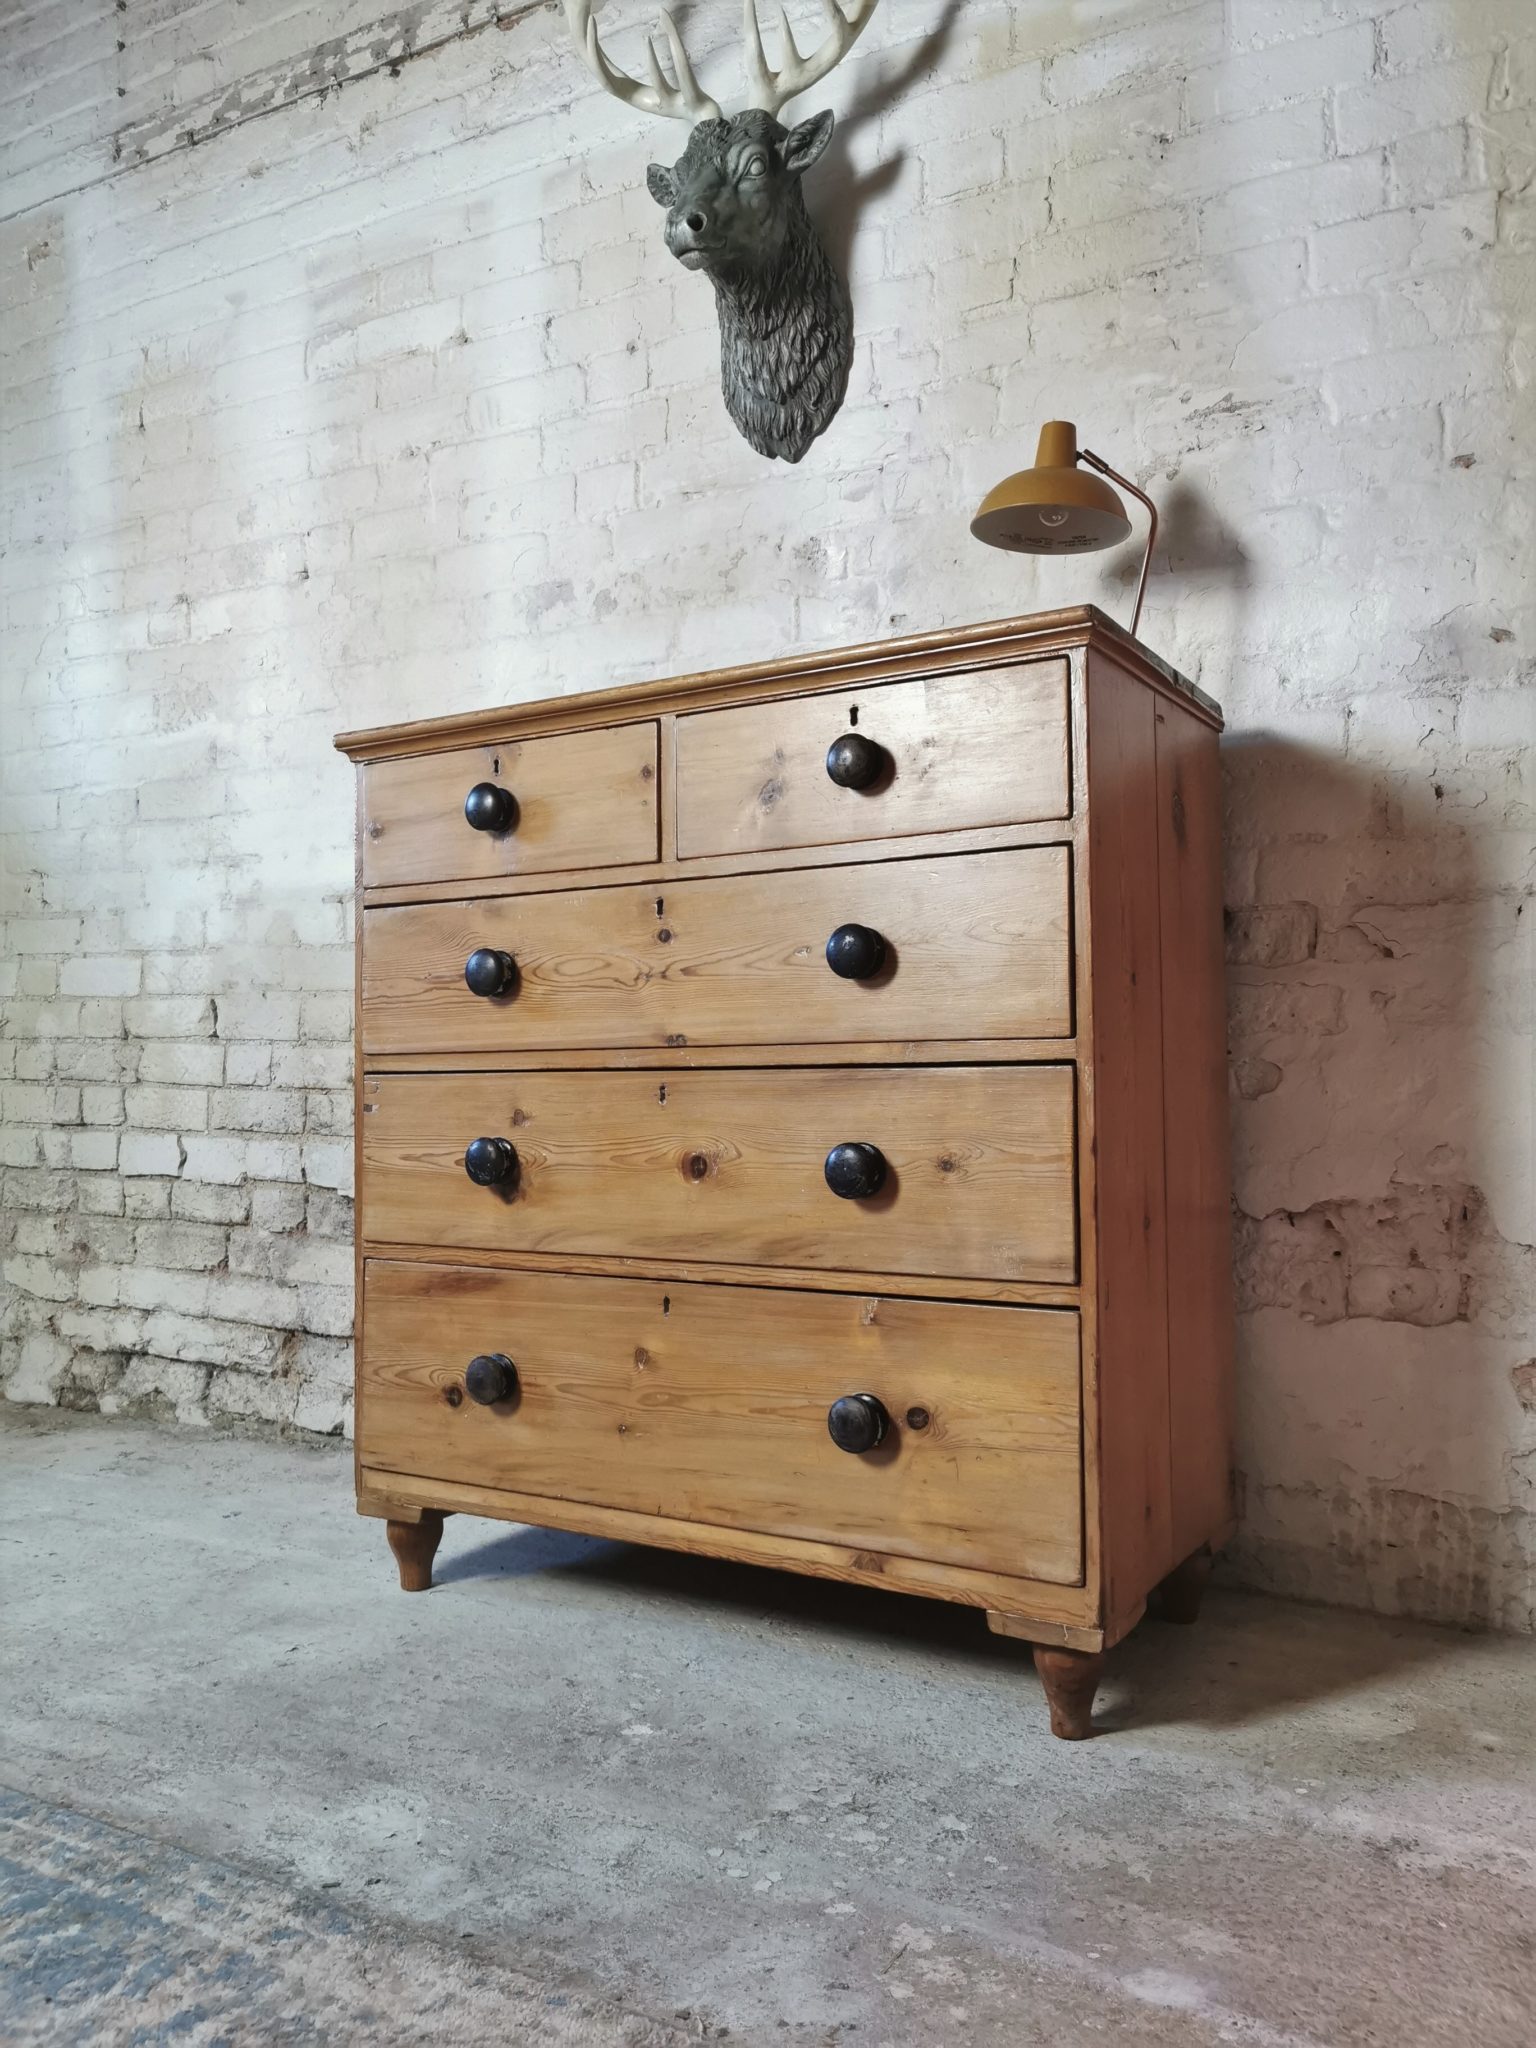 SOLD: Large Antique Pine Chest of Drawers - Cambrewood